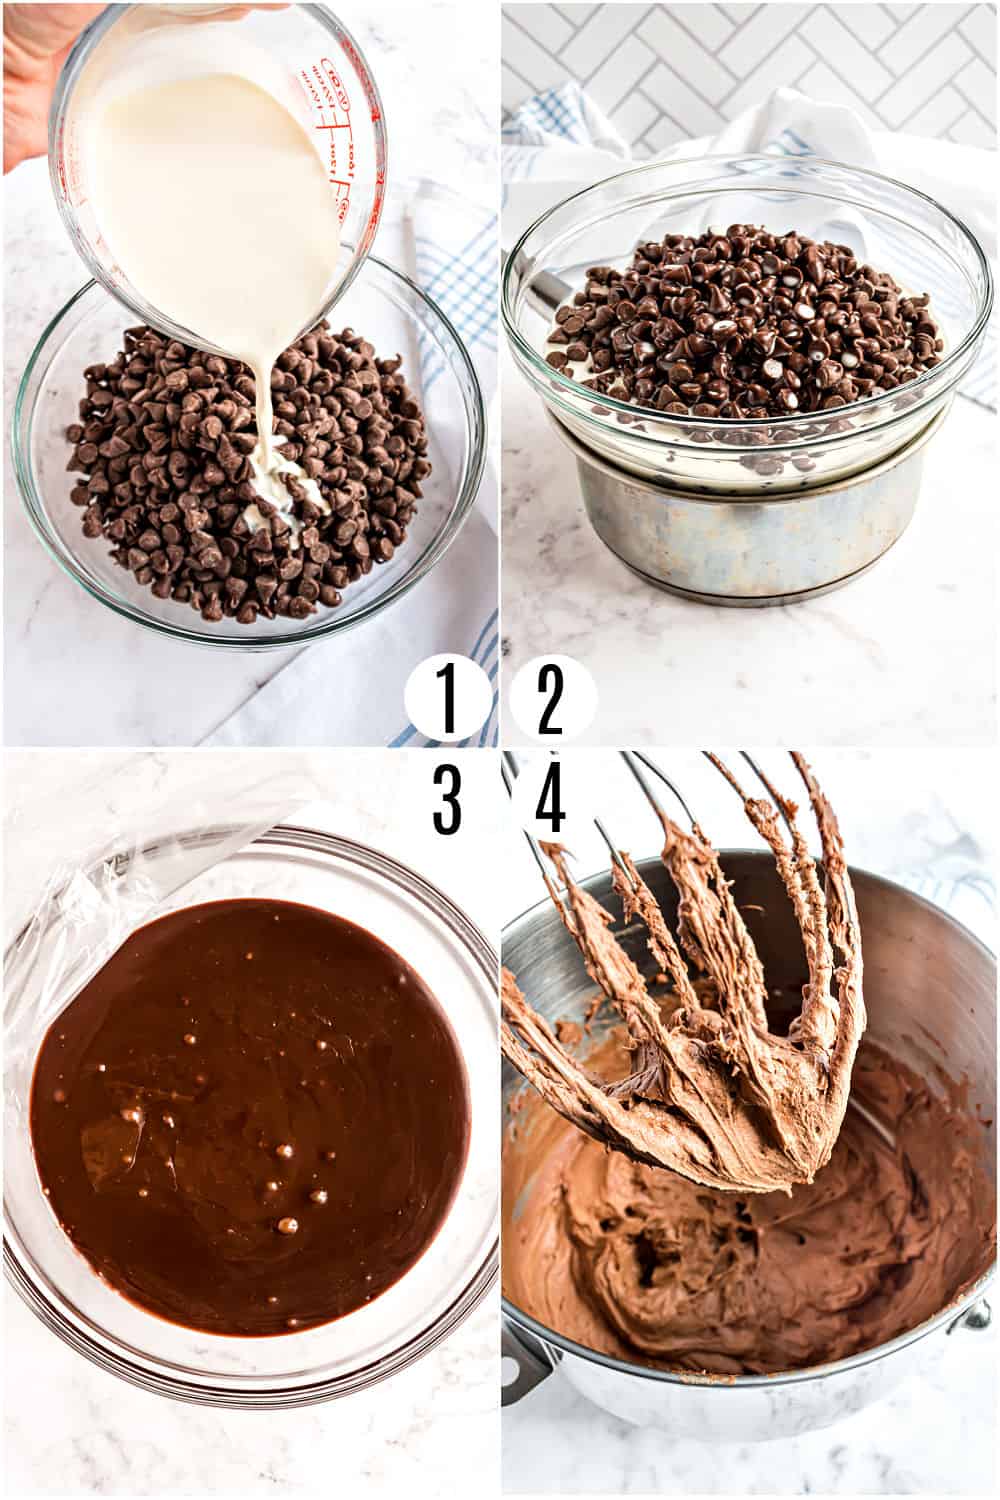 Step by step photos showing how to make chocolate ganache frosting.